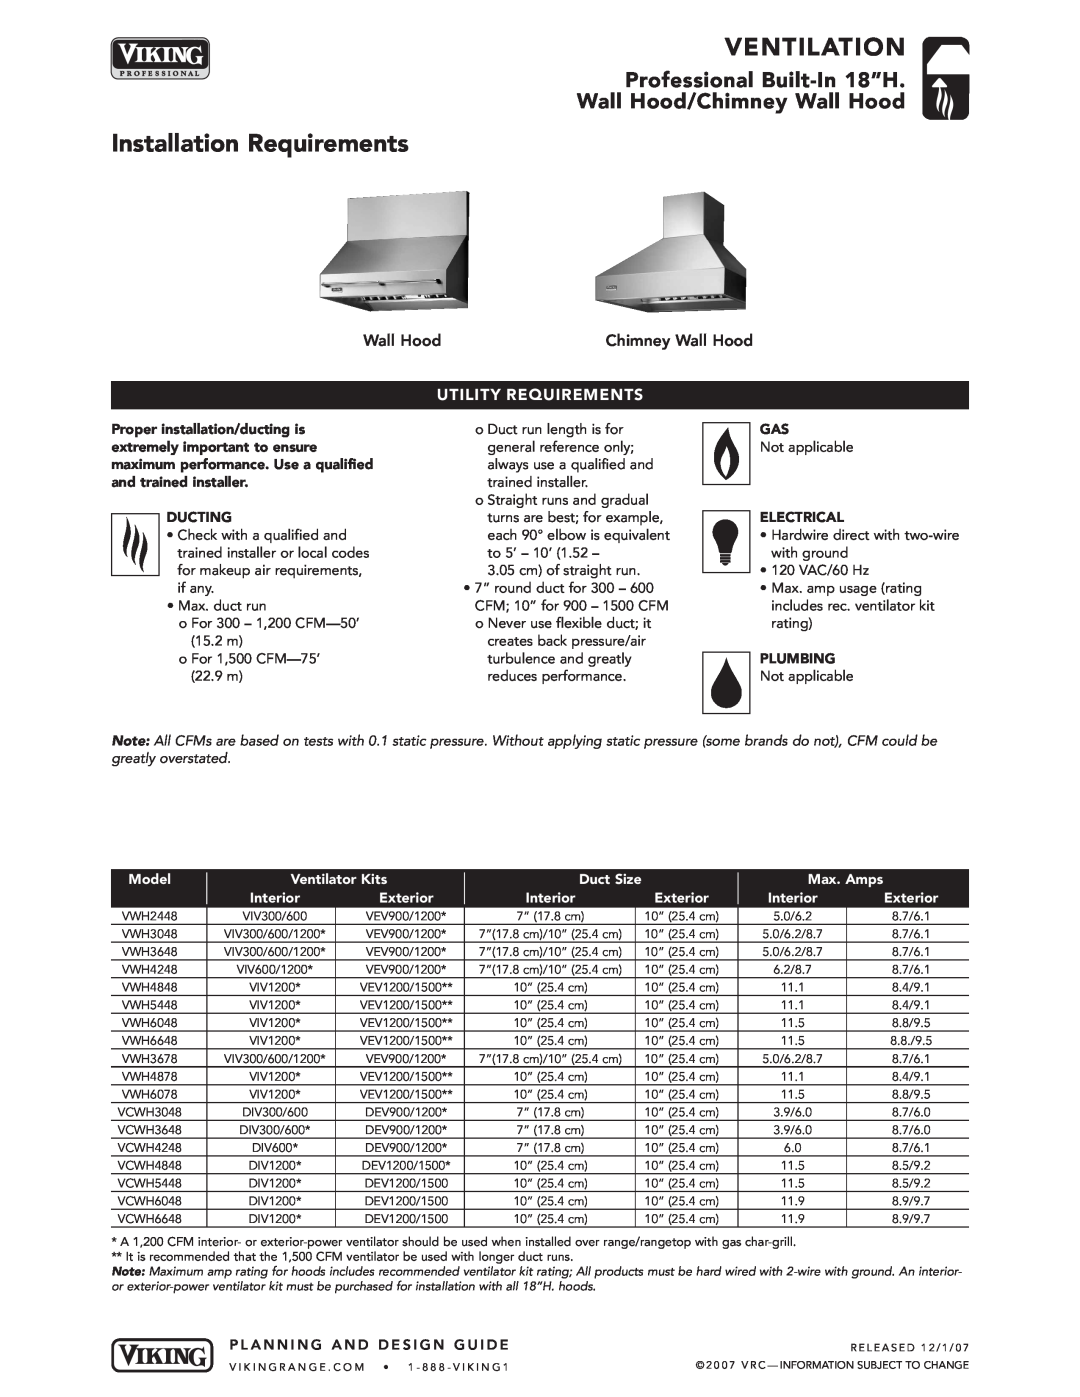 Viking VCWH Installation Requirements, Ventilation, Professional Built-In 18”H Wall Hood/Chimney Wall Hood, Ducting 